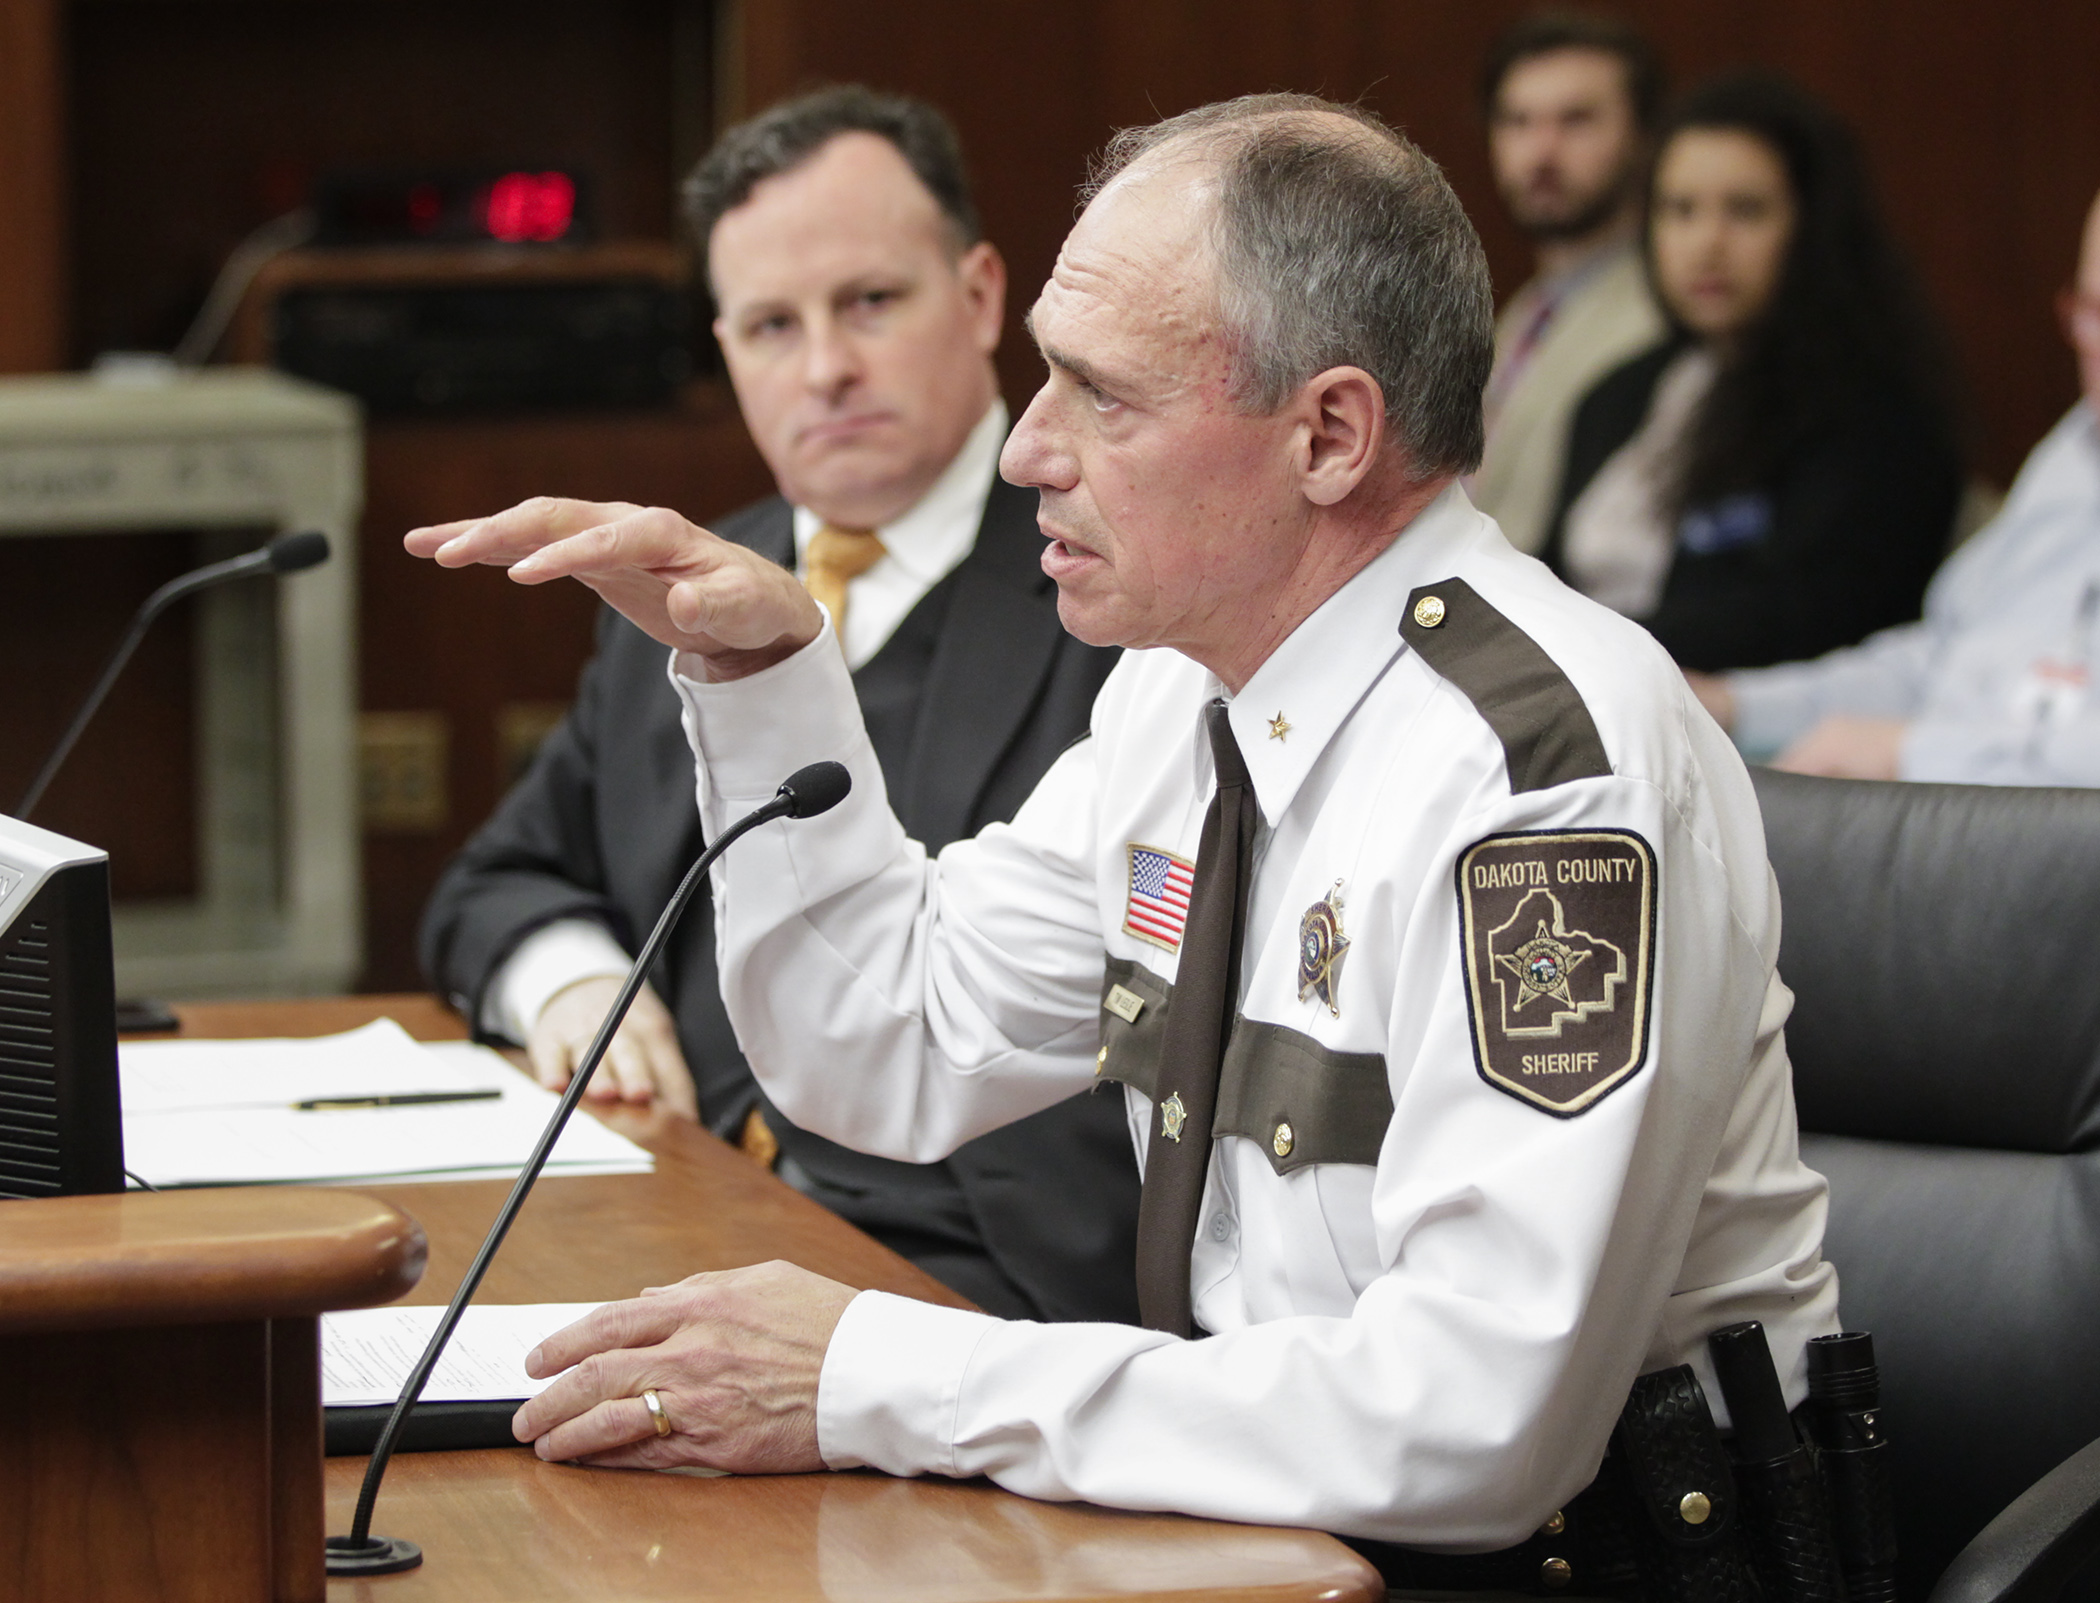 Dakota County Sheriff Tim Leslie testifies on HF1236, sponsored by Rep. John Lesch, left, which would restrict the use of unmanned aerial vehicles (drones) by law enforcement agencies. Photo by Paul Battaglia